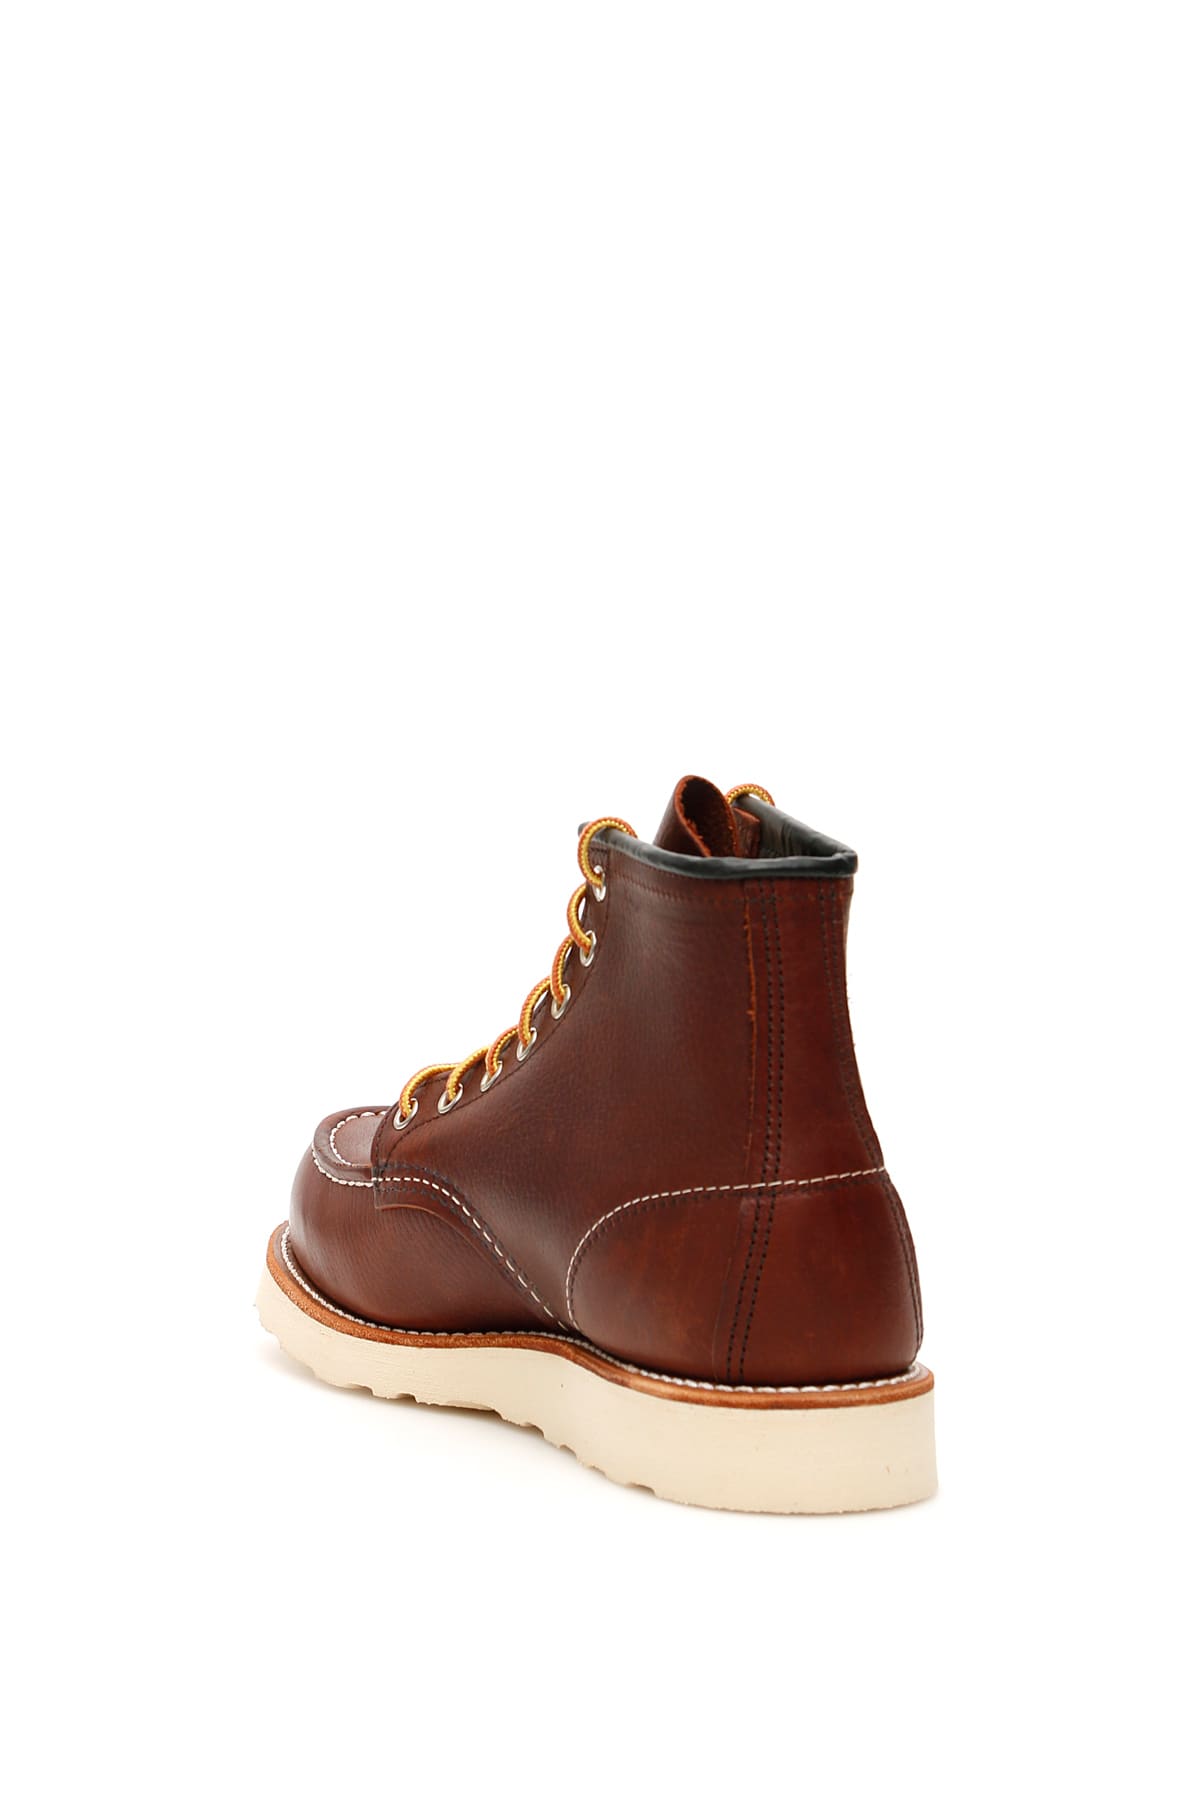 red wing 08138